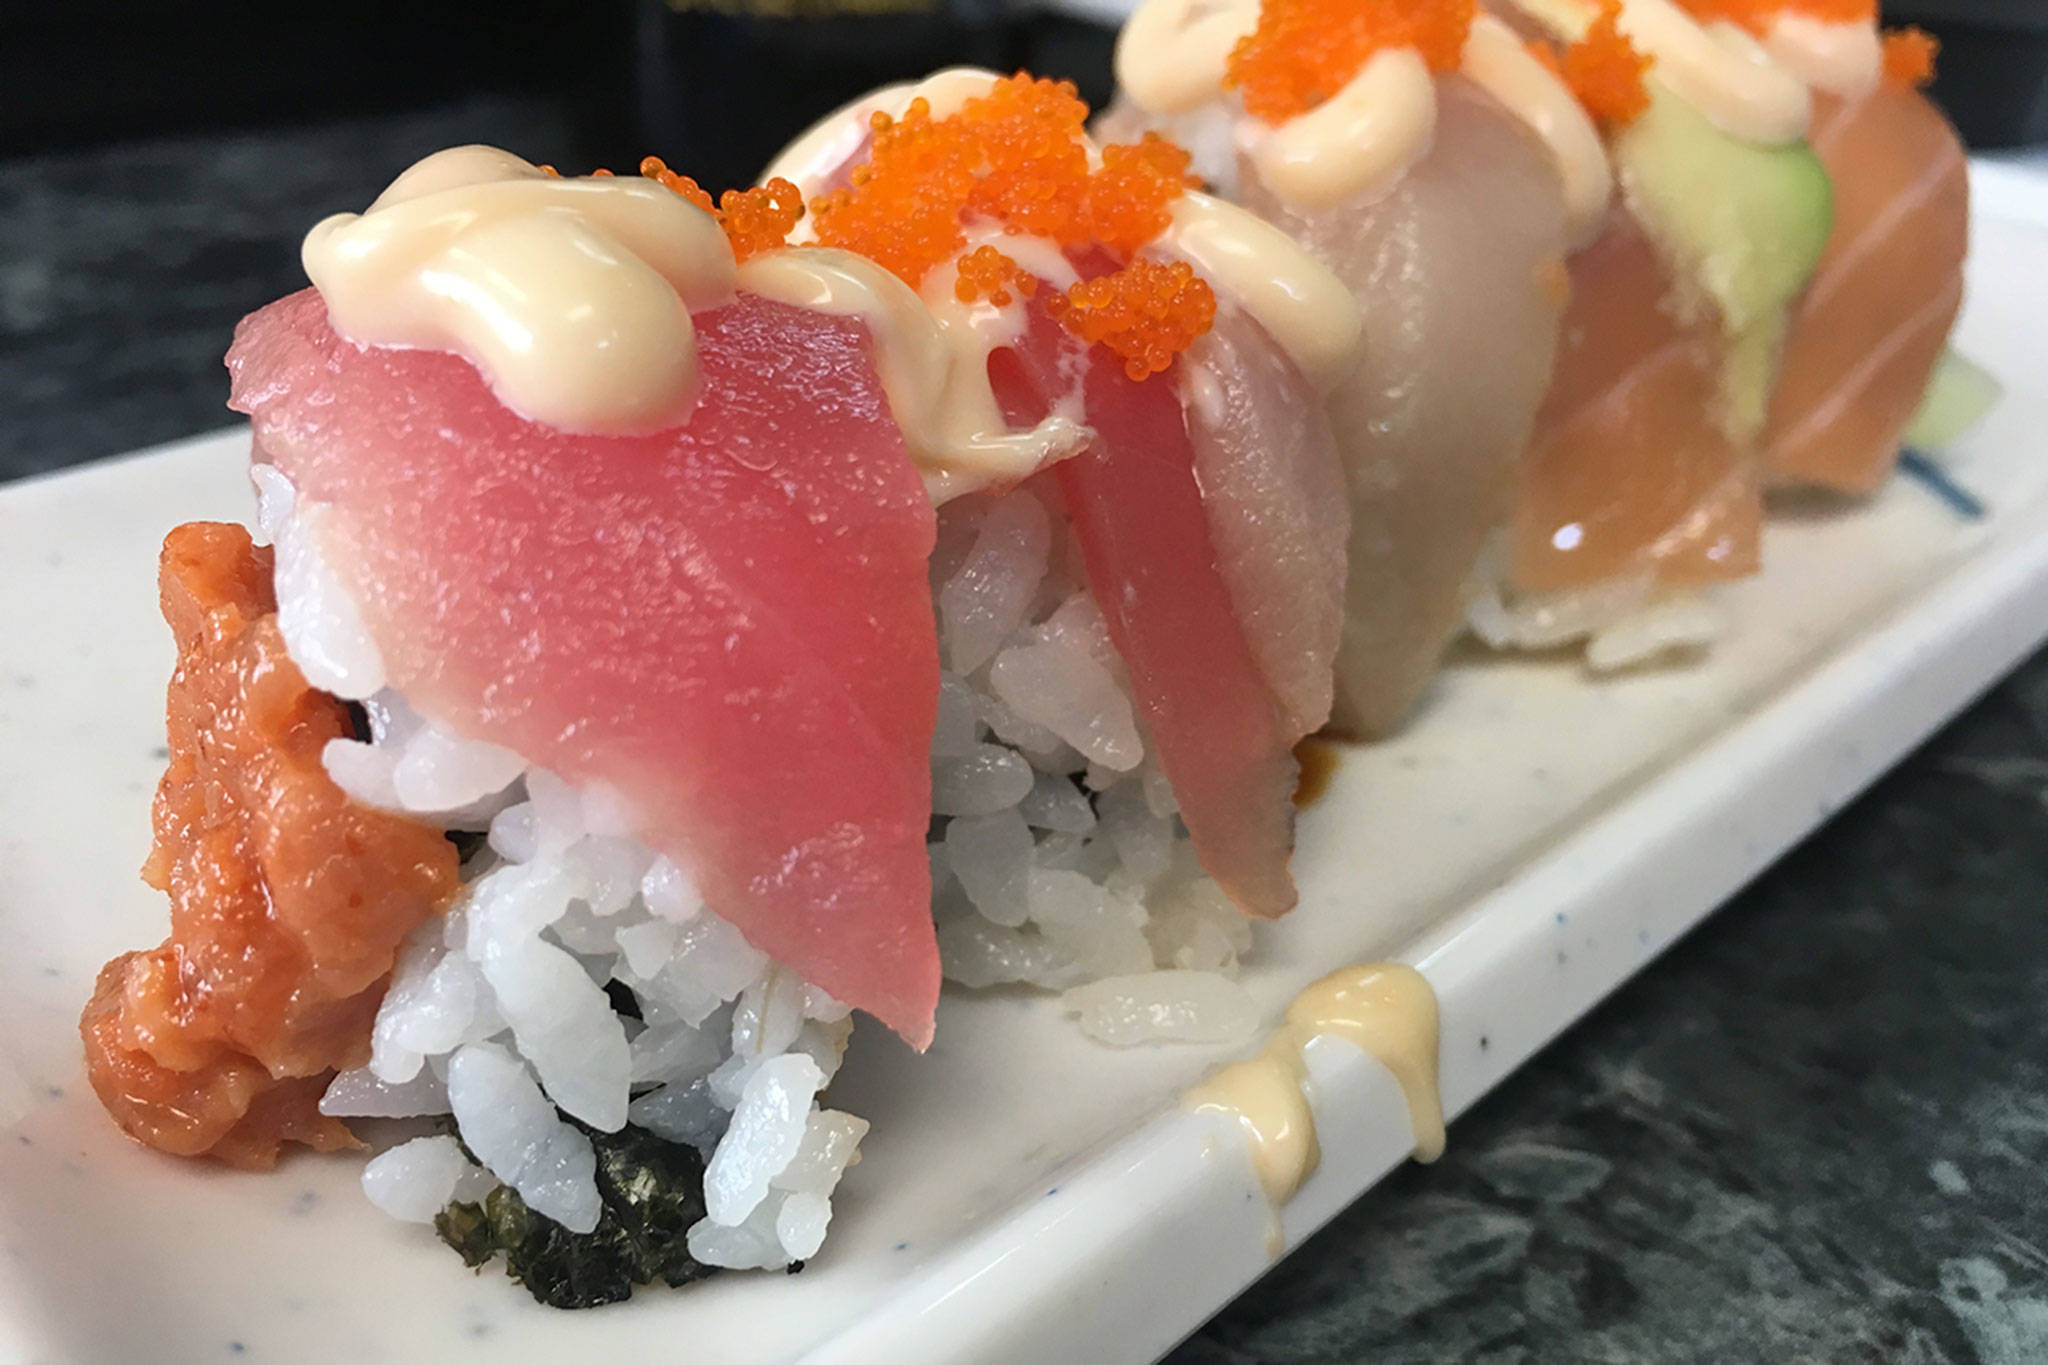 The sex on the beach roll is off-menu and has a little bit of everything on it, making it great as a sampler or a first roll at Sushi Ring. (Ben Watanabe / The Herald)